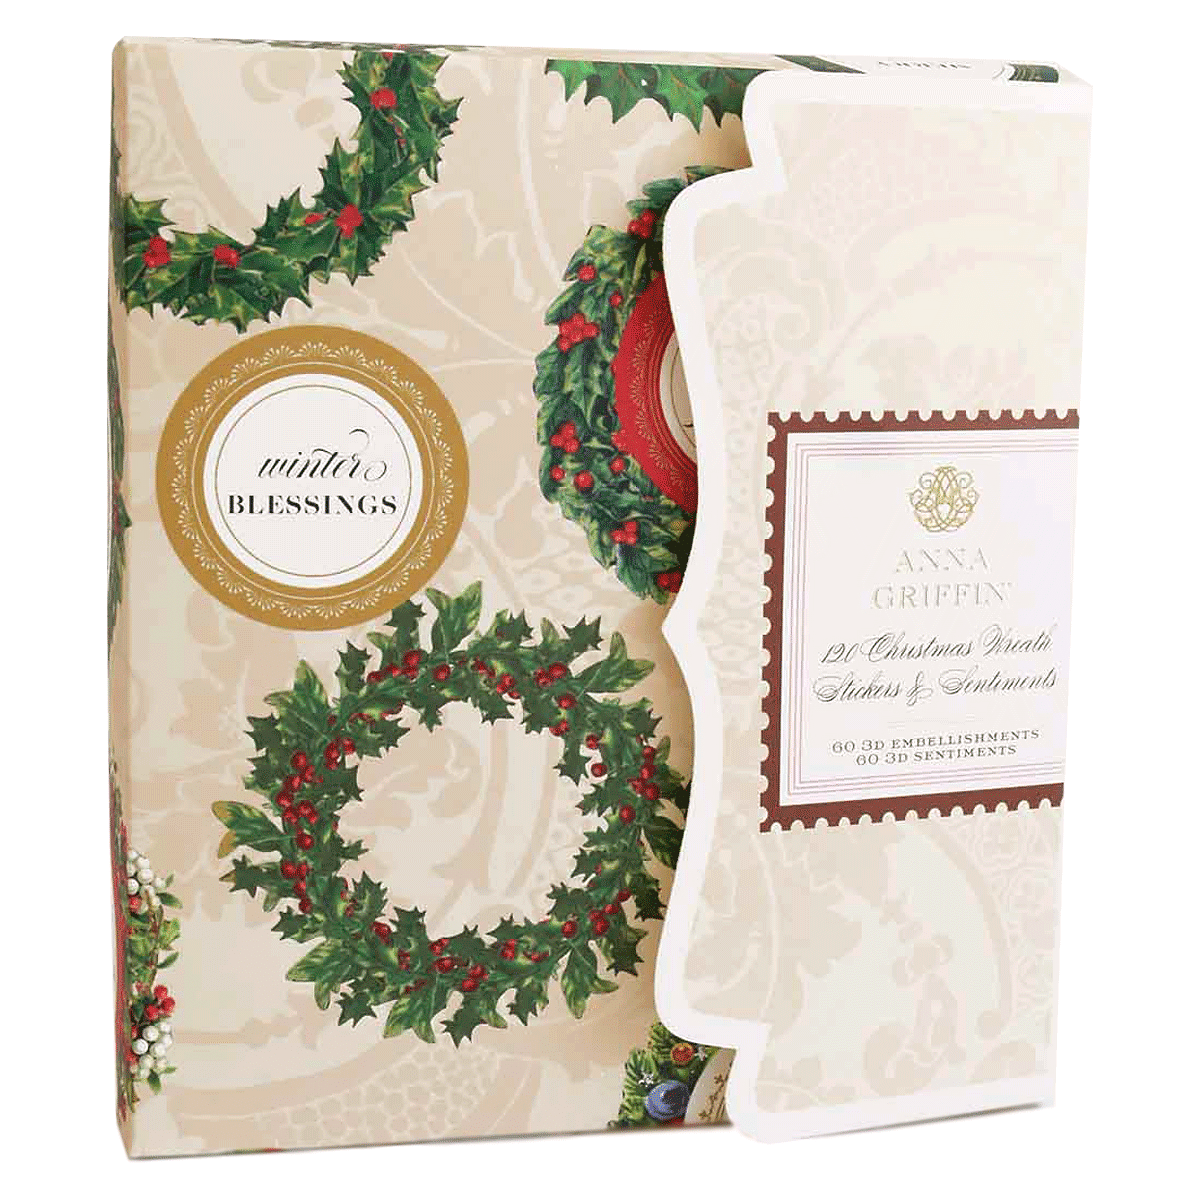 a christmas card with holly wreaths on it.